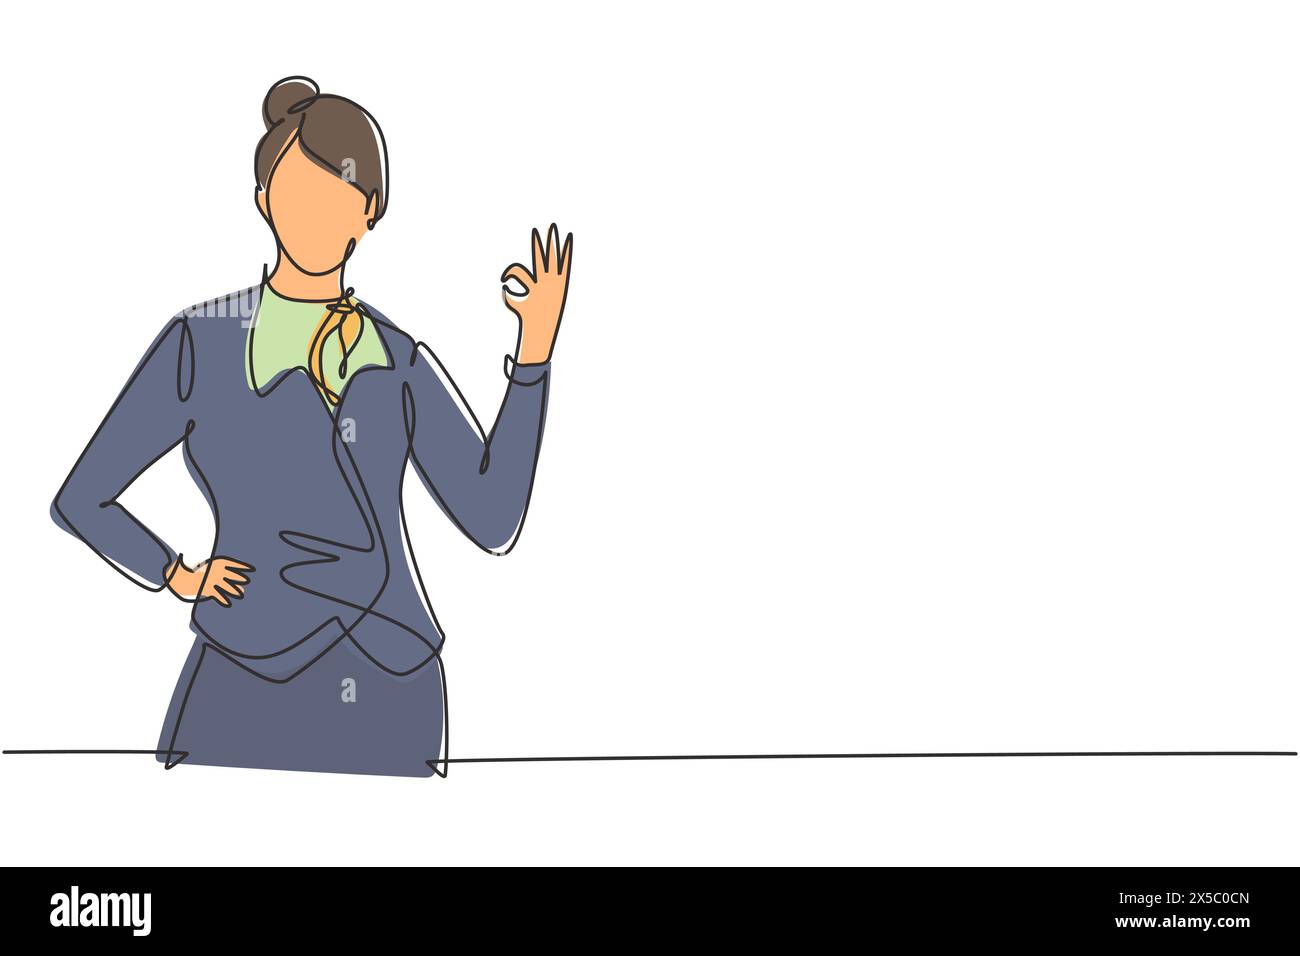 Single one line drawing flight attendant with gesture okay ready to serve airplane passengers in a friendly and warm manner. Professional work. Contin Stock Vector